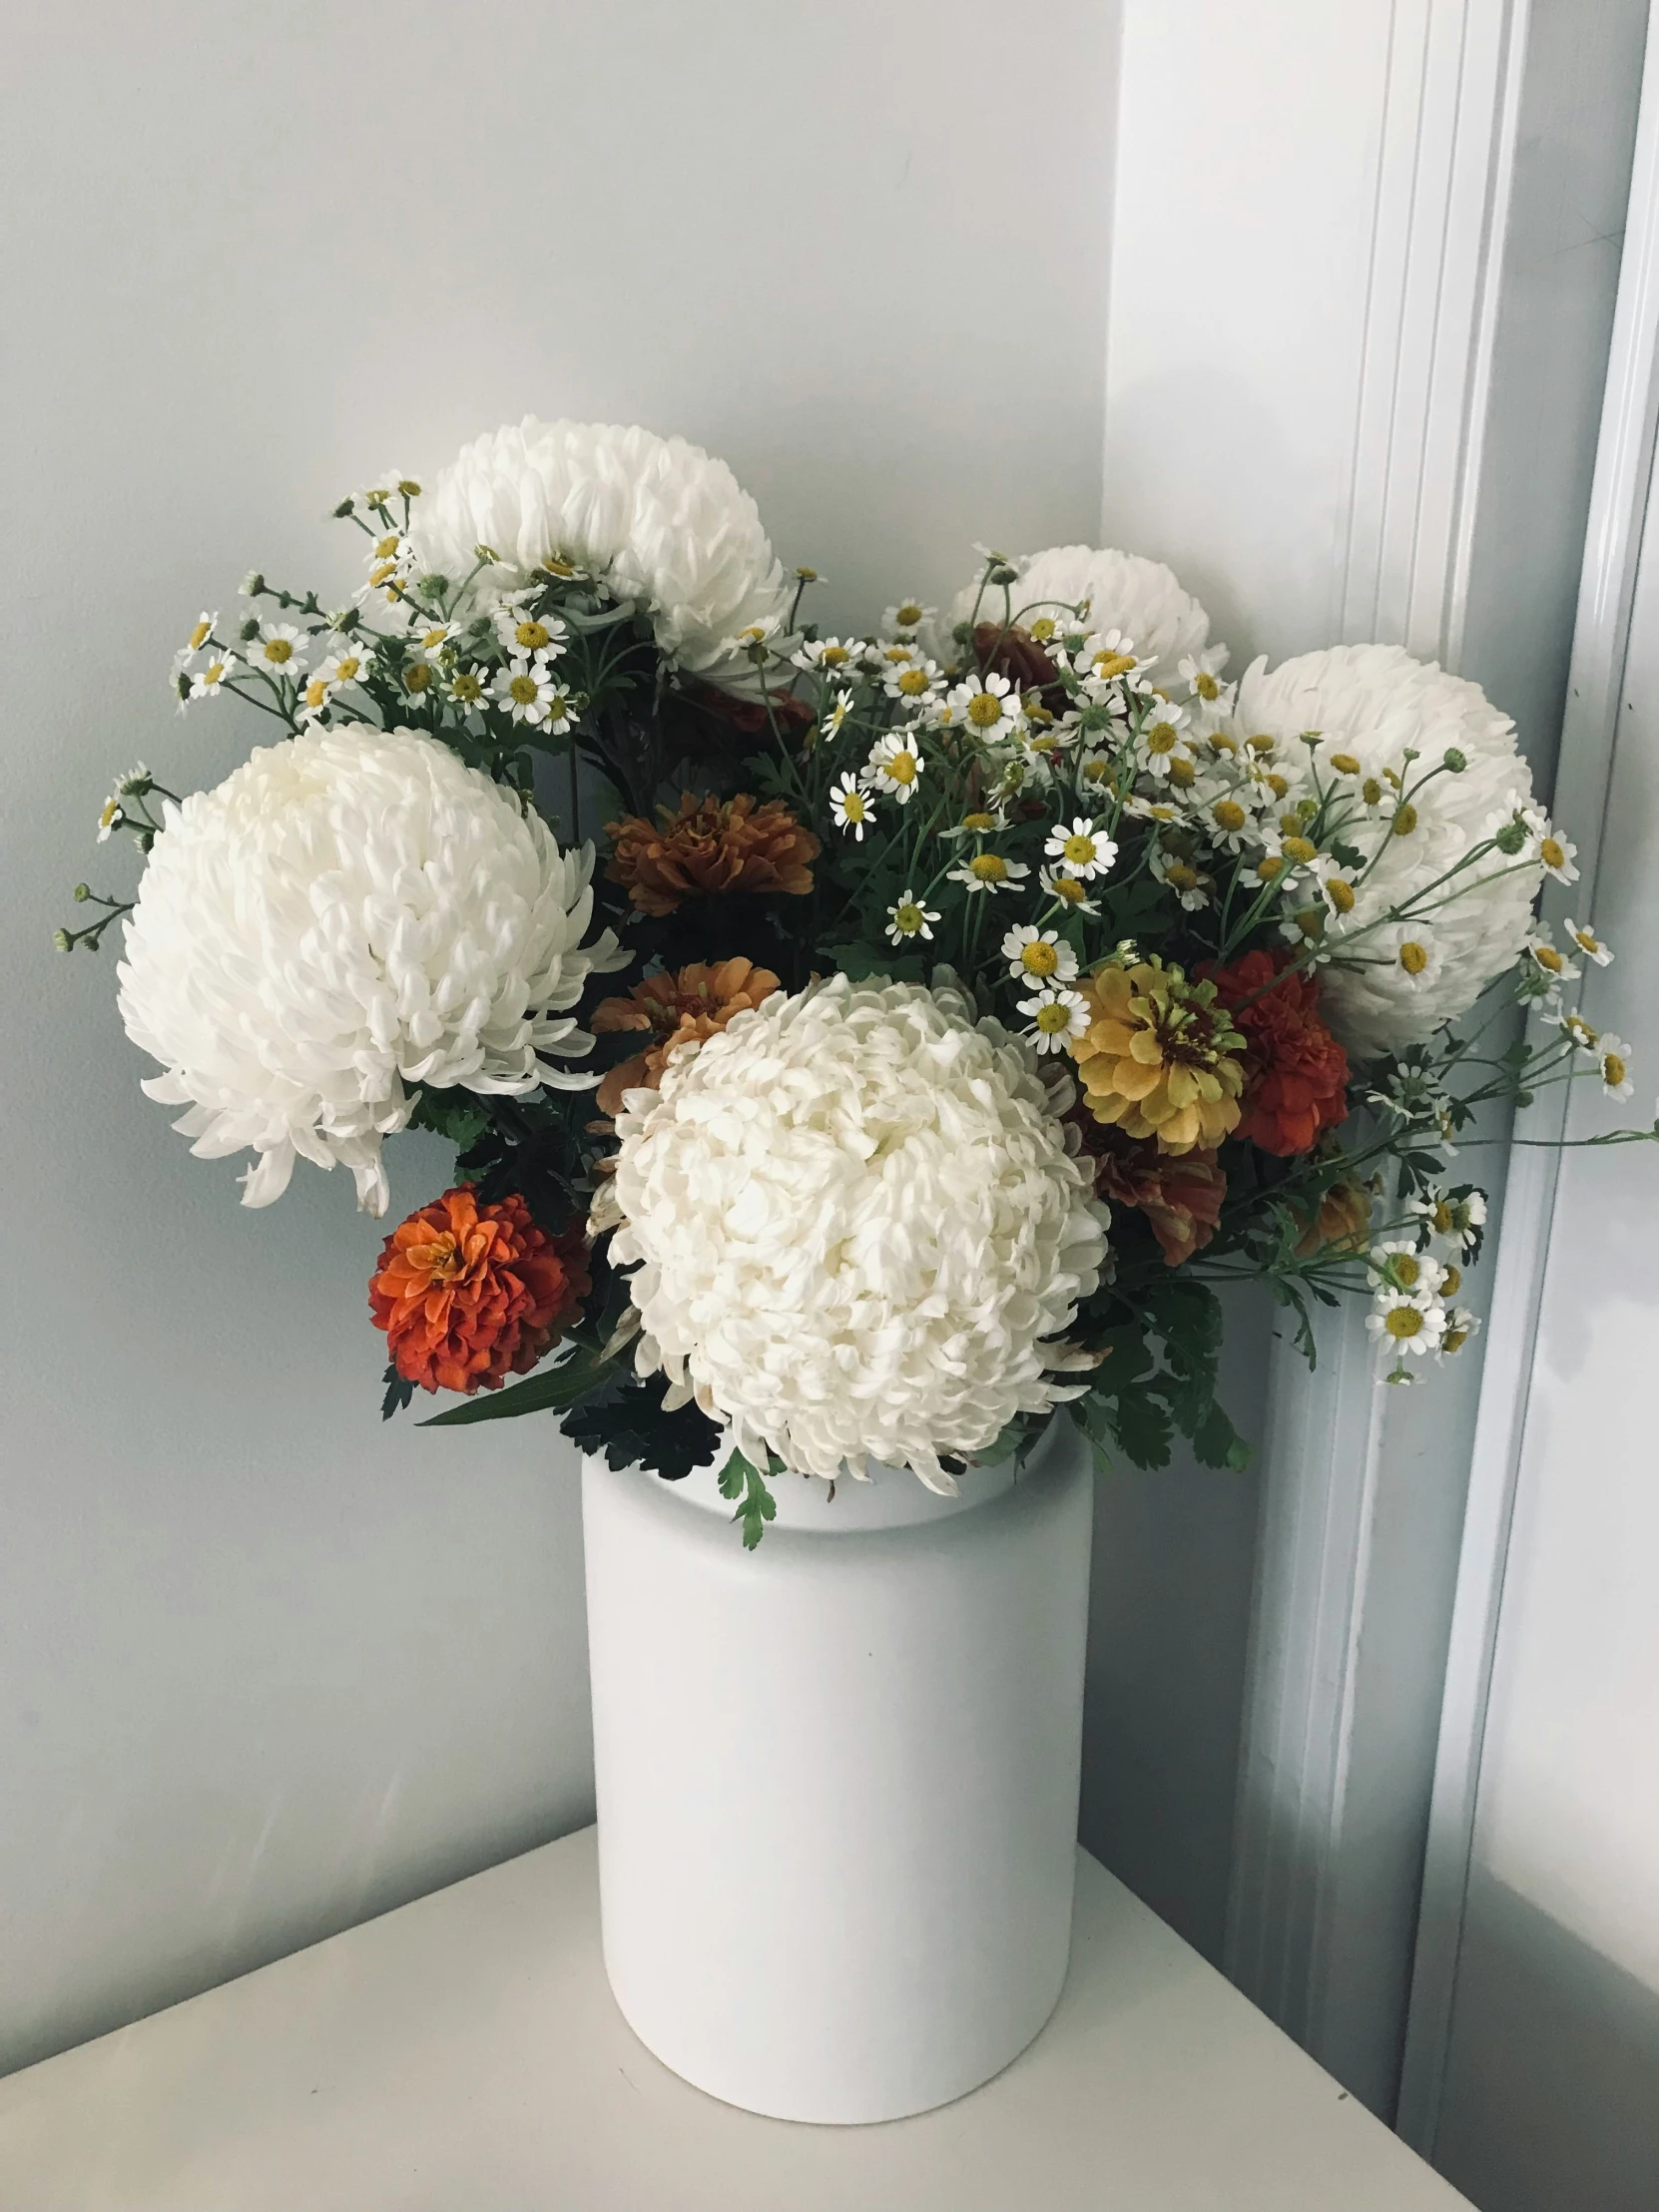 this is a white vase with flowers inside